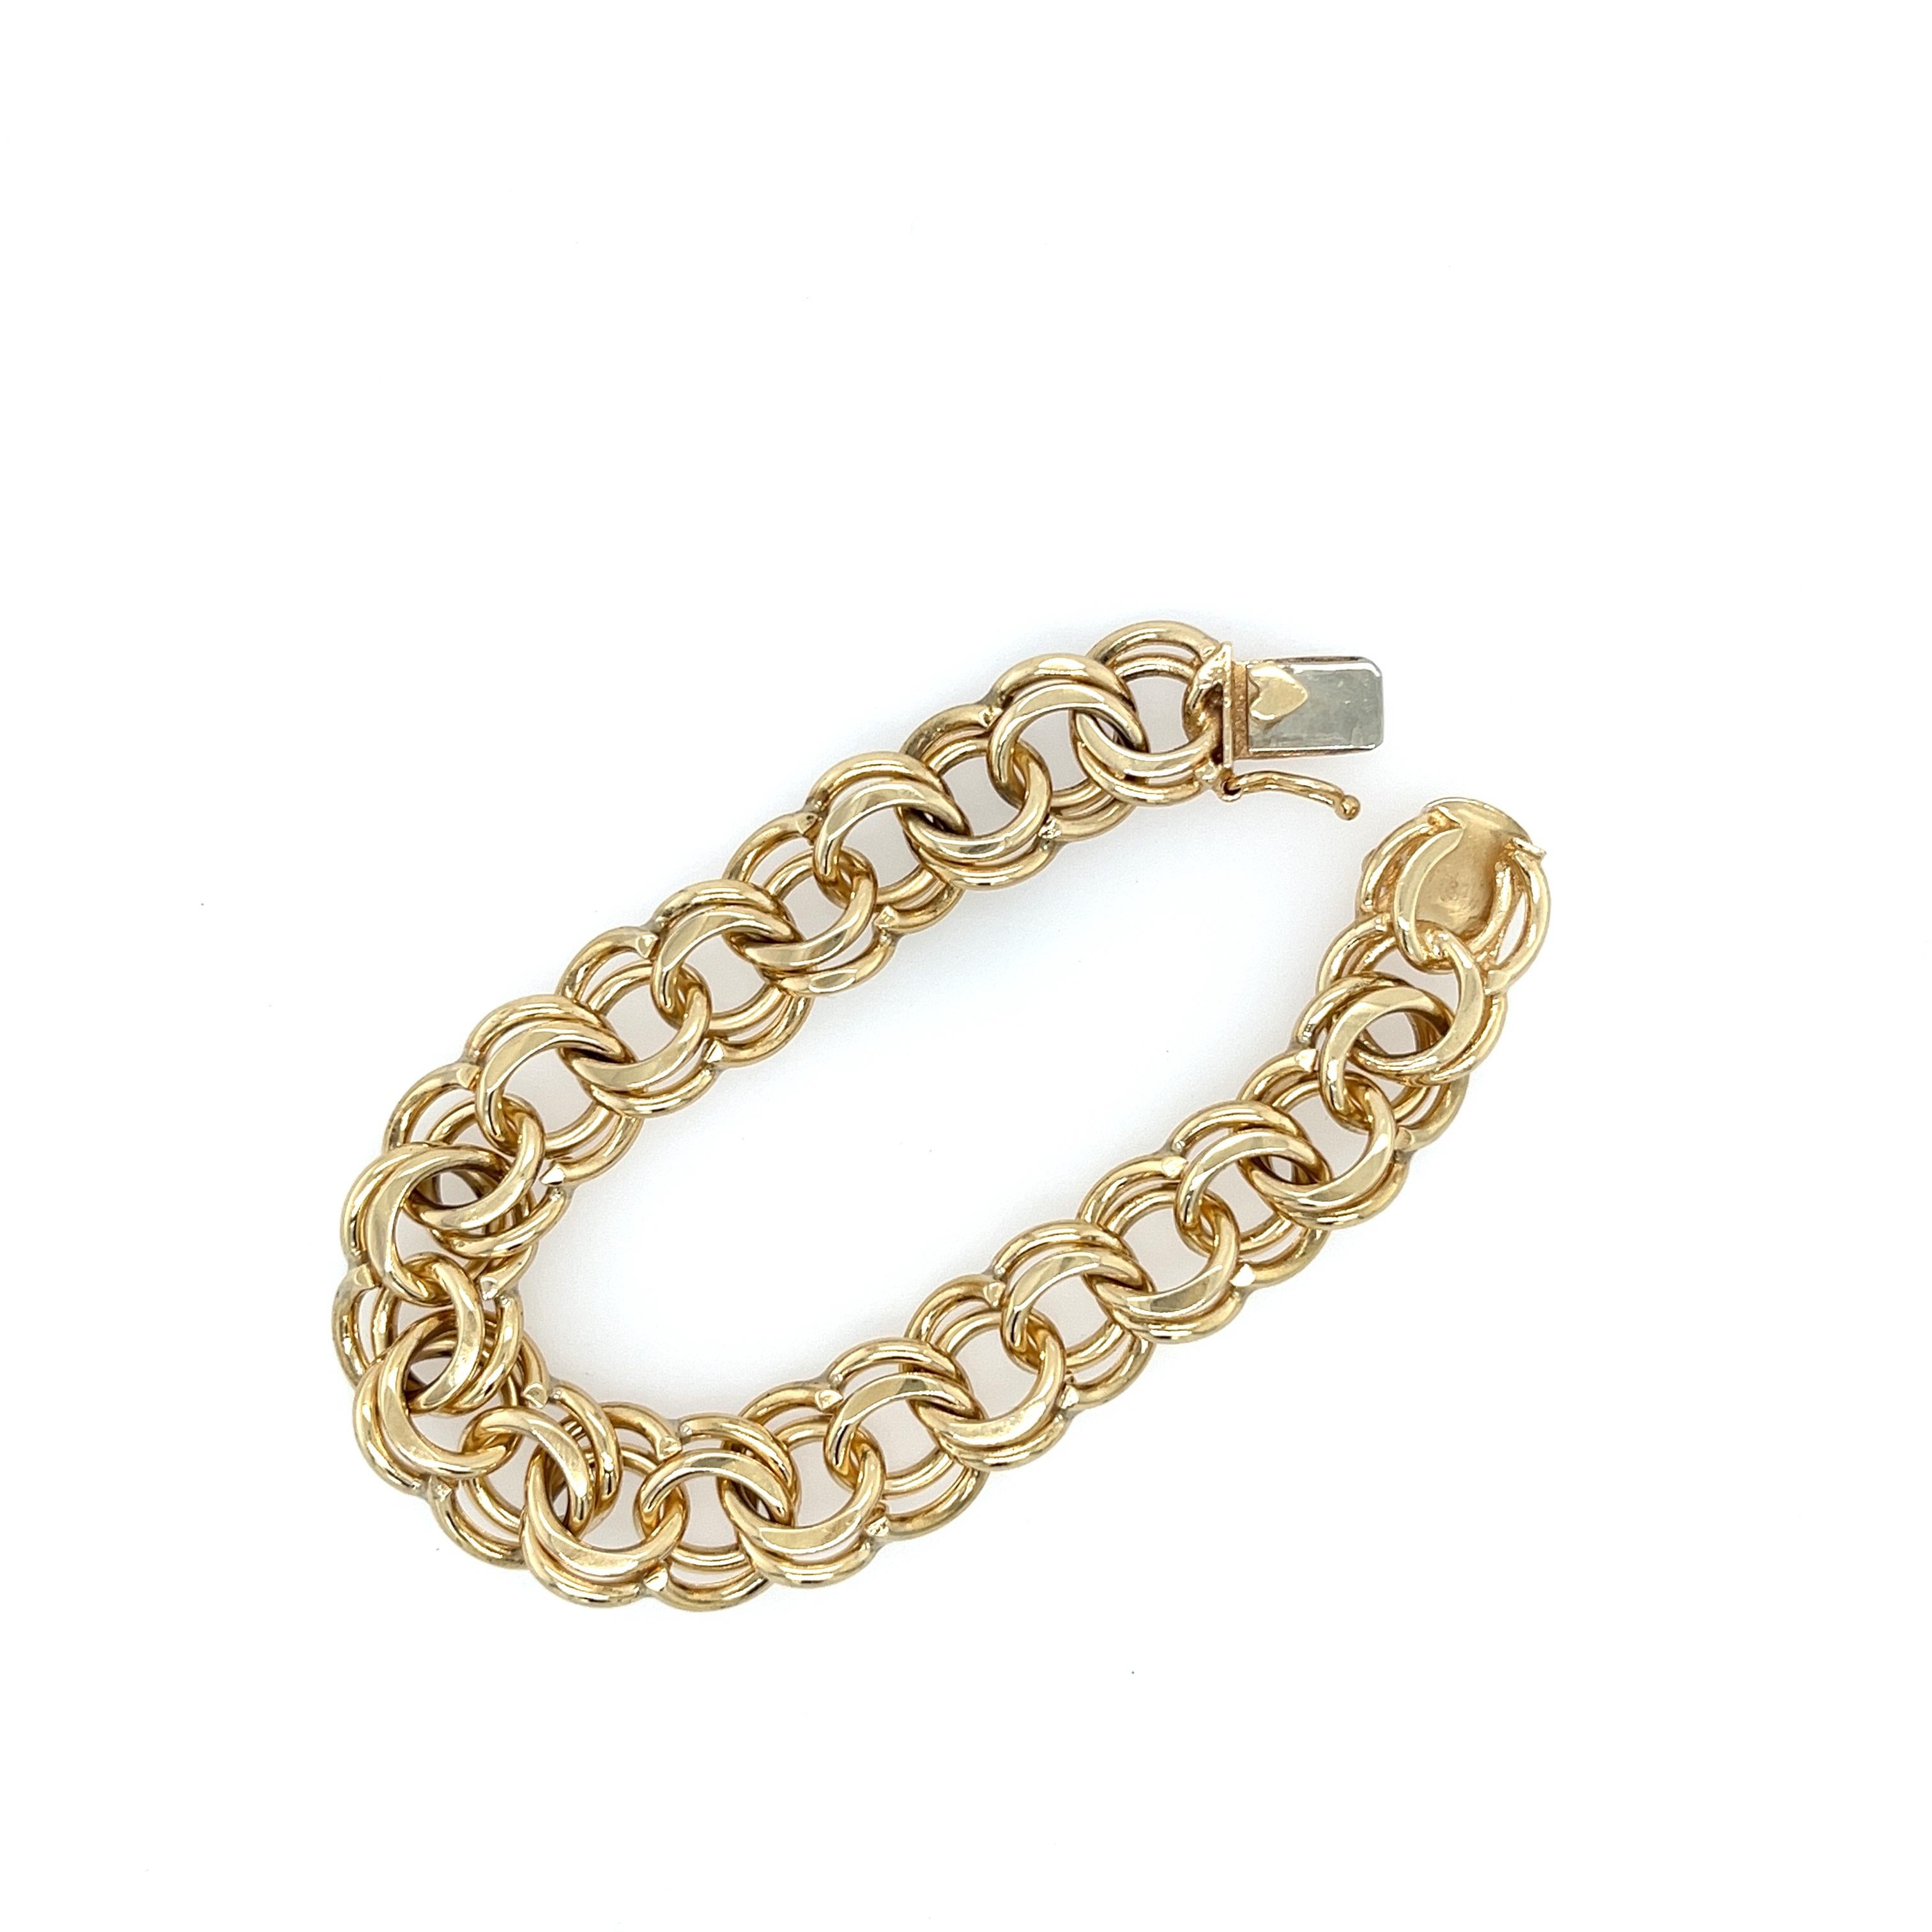 A vintage heavy double link charm bracelet with substantial weight! Crafted of 14K yellow gold, this bracelet is stamped with 